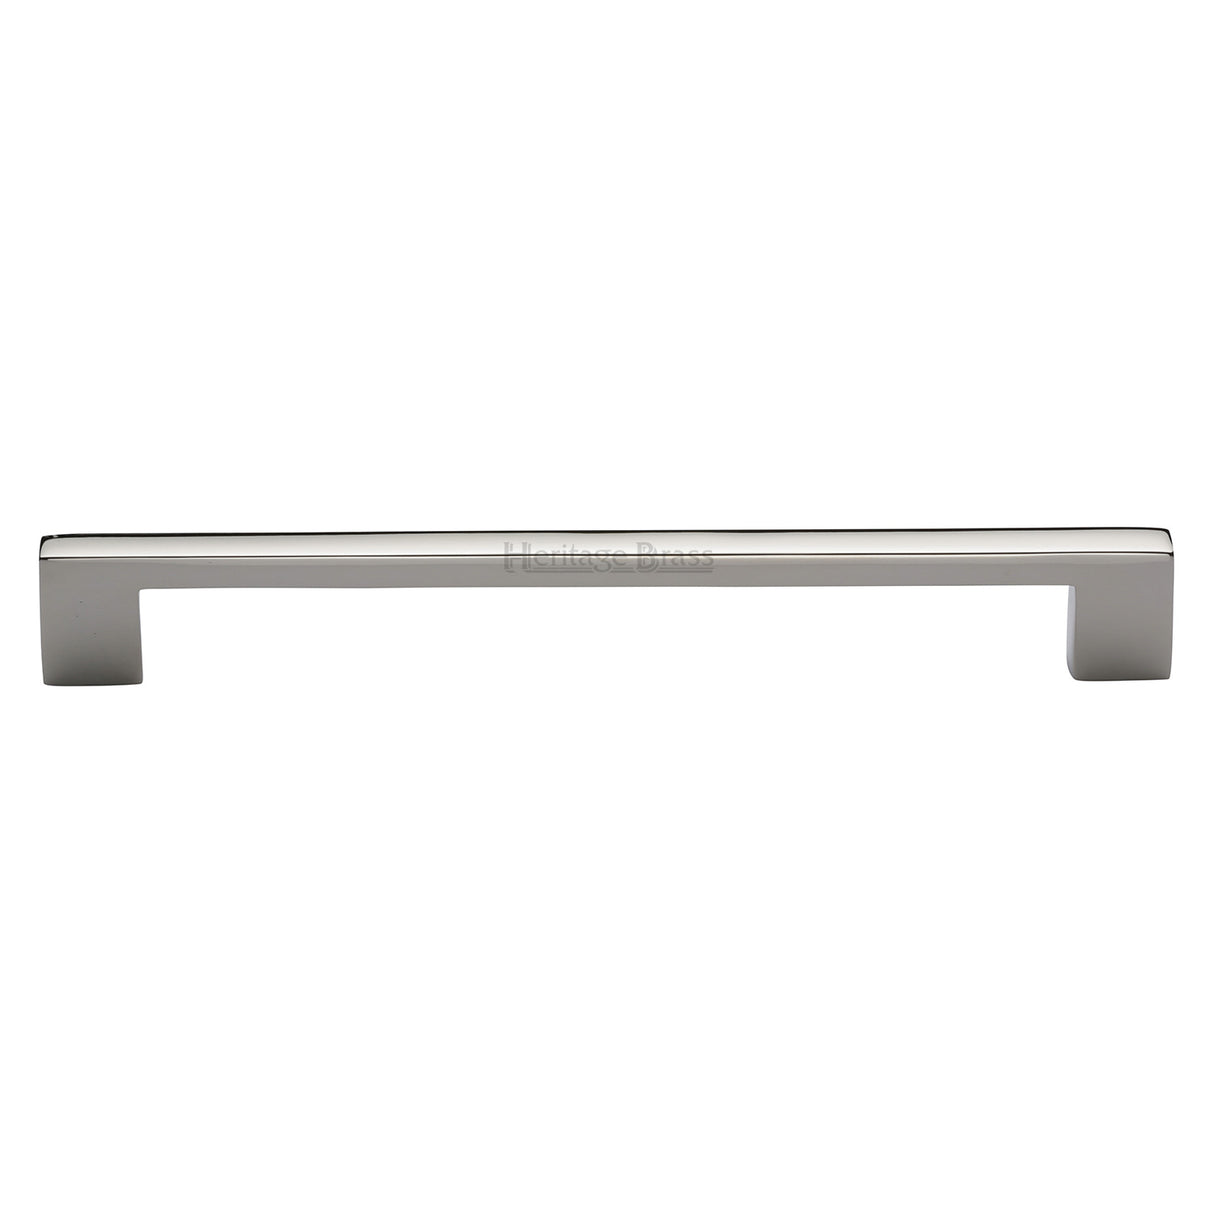 This is an image of a Heritage Brass - Cabinet Pull Metro Design 254mm CTC Polished Nickel Finish, c0337-254-pnf that is available to order from Trade Door Handles in Kendal.